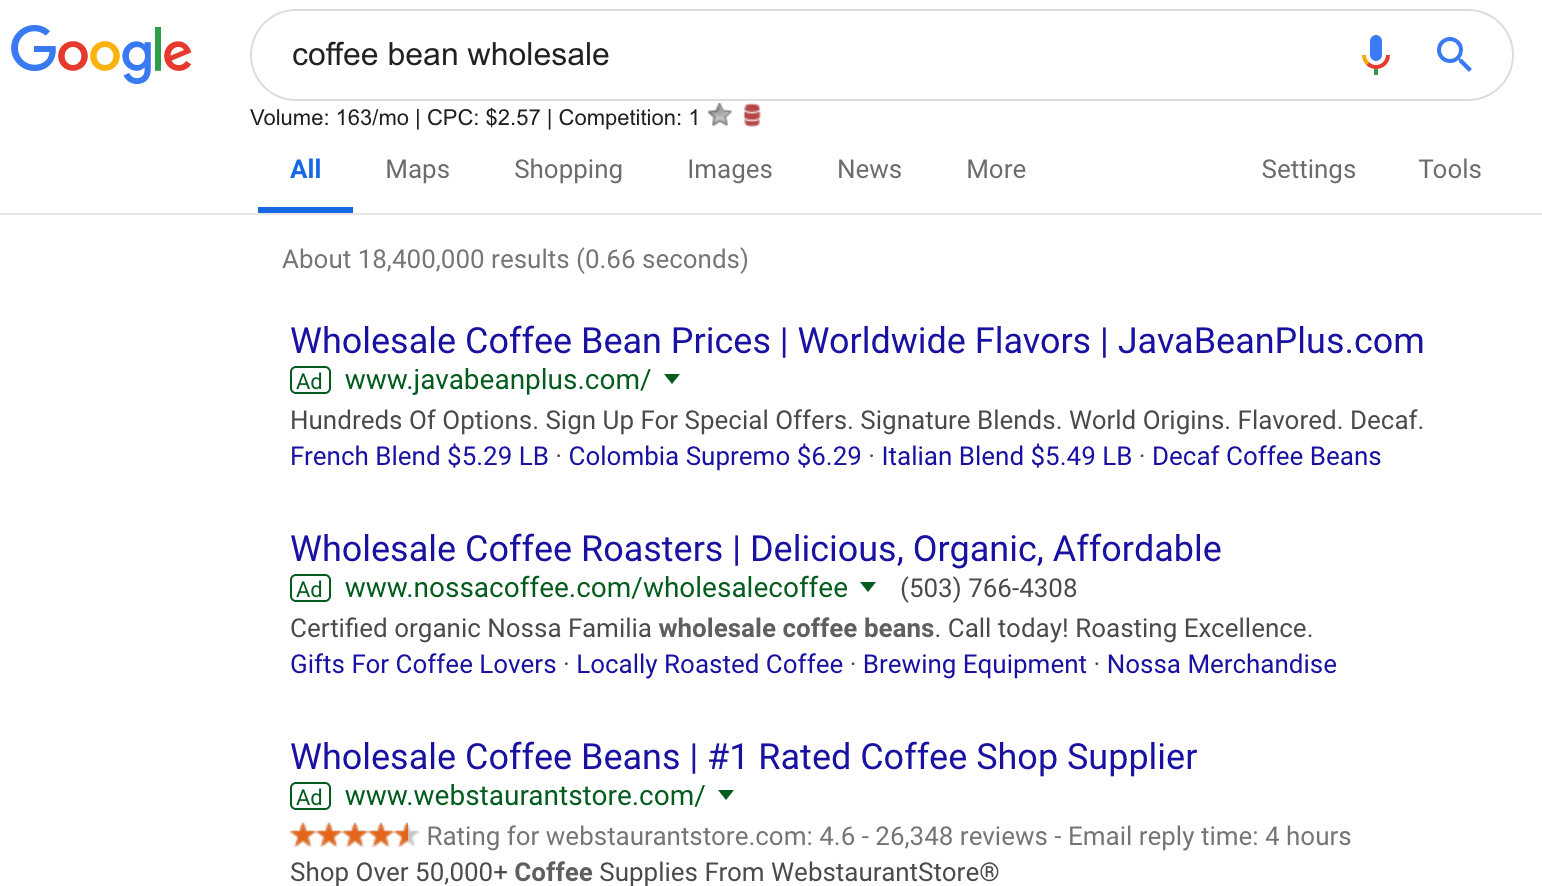 COFFEE BEAN WHOLESALE SEARCH RESULTS